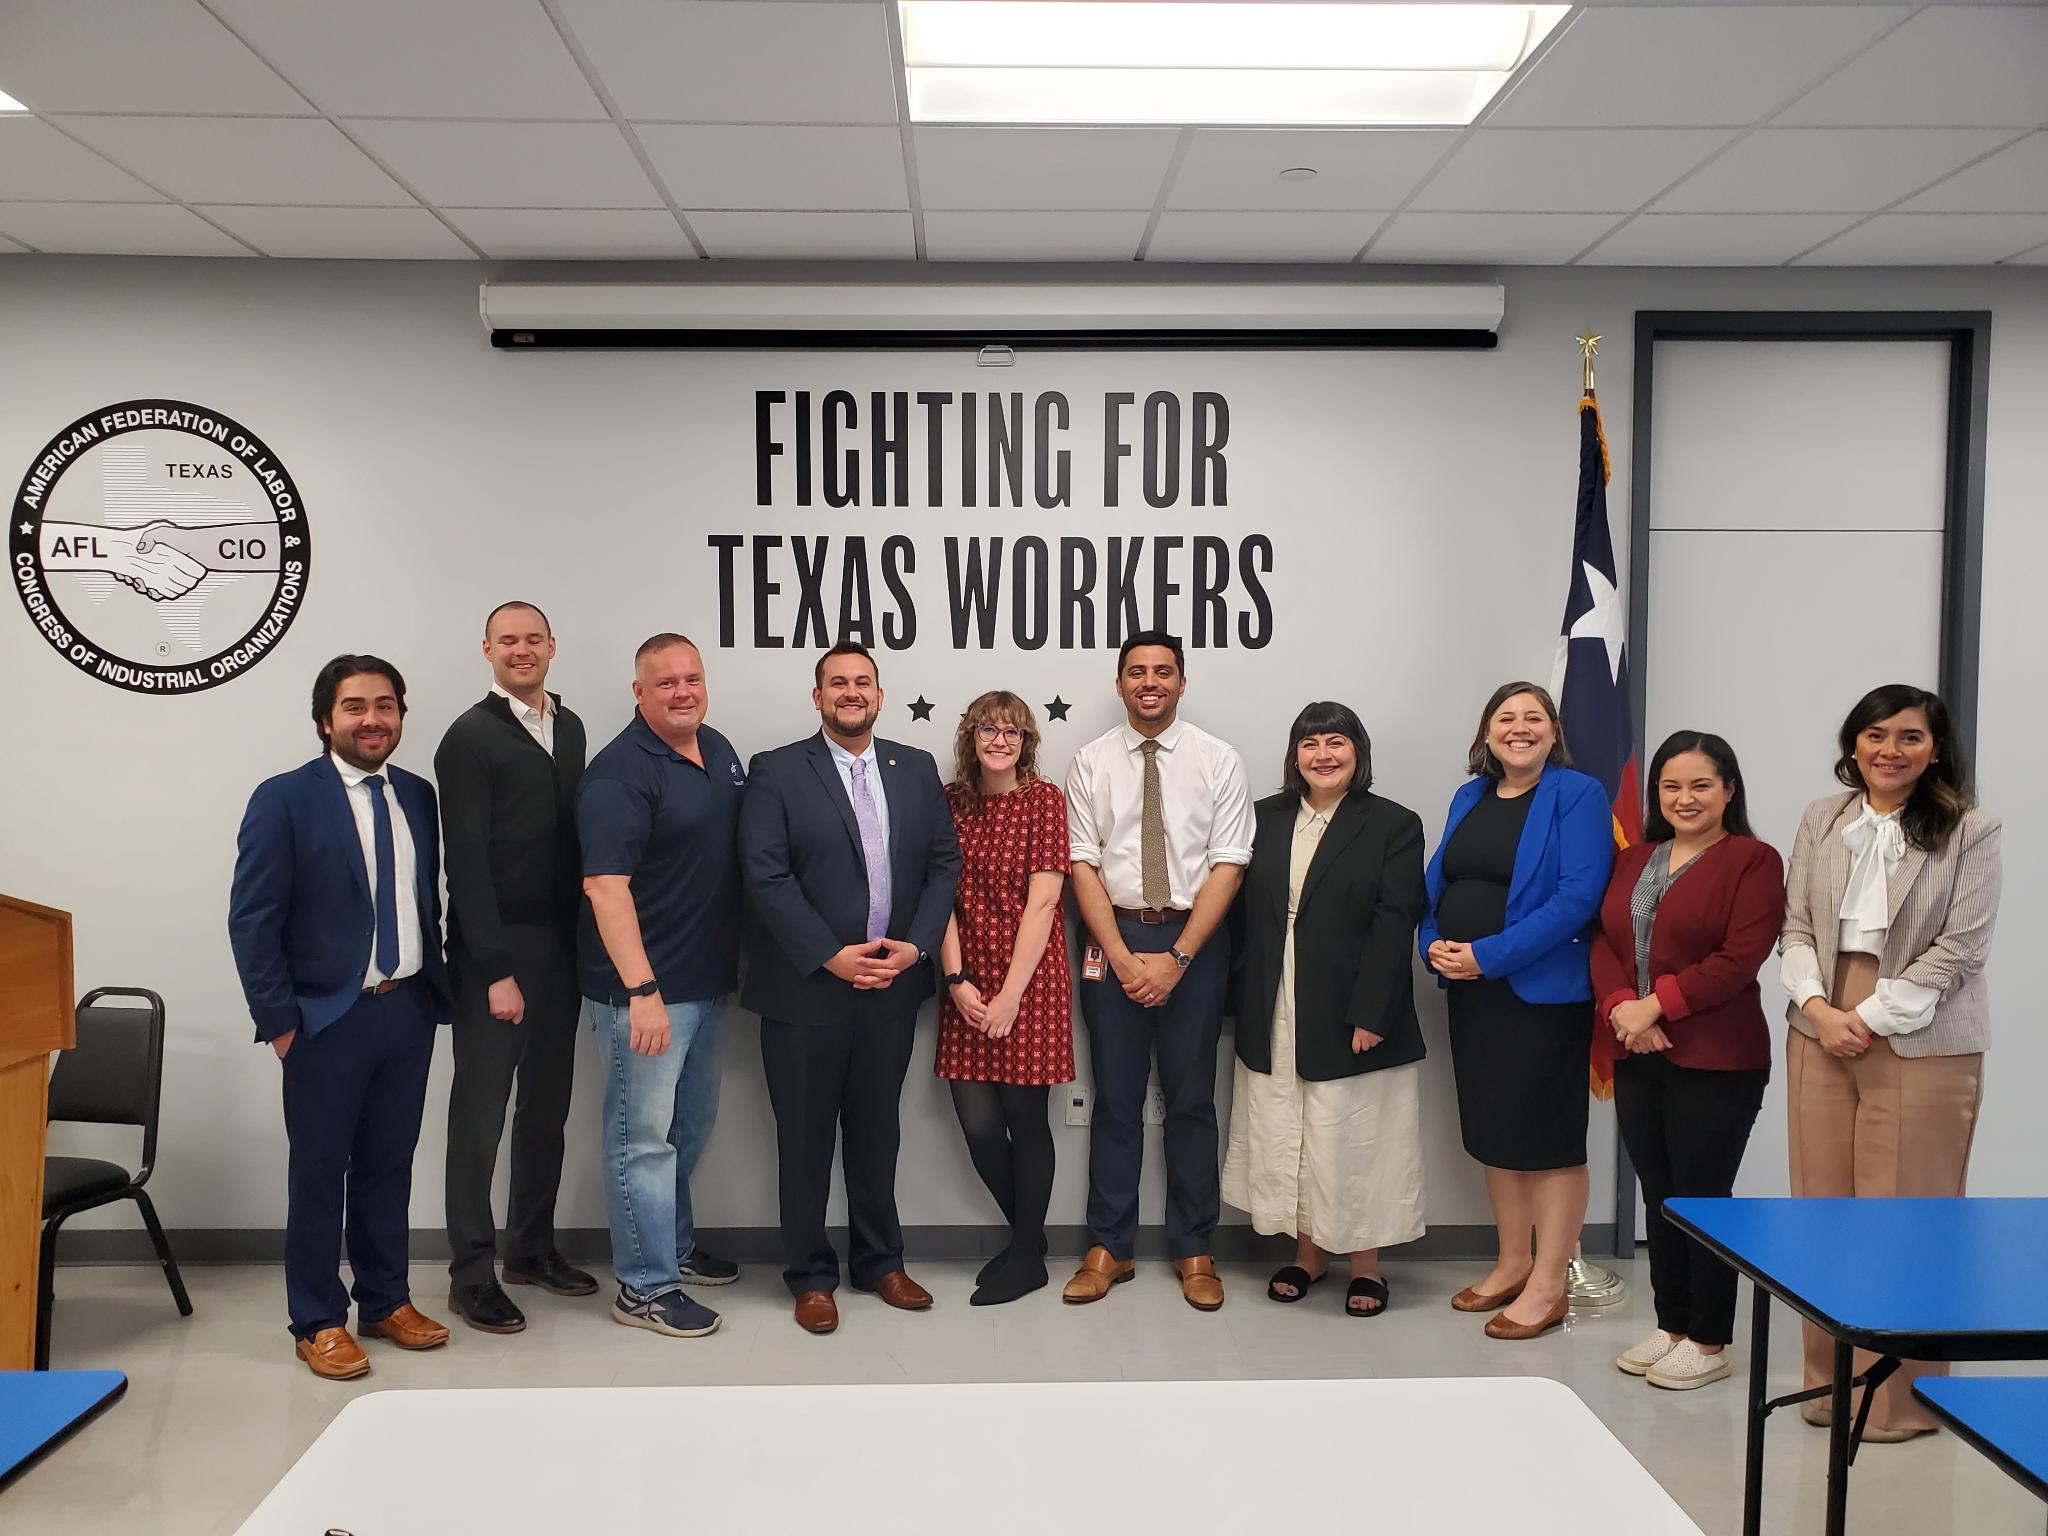 LPTX members, parters, and staff posing for a photo in front of a mural that says "Fighting for Texas Workers" in Austin, Texas.